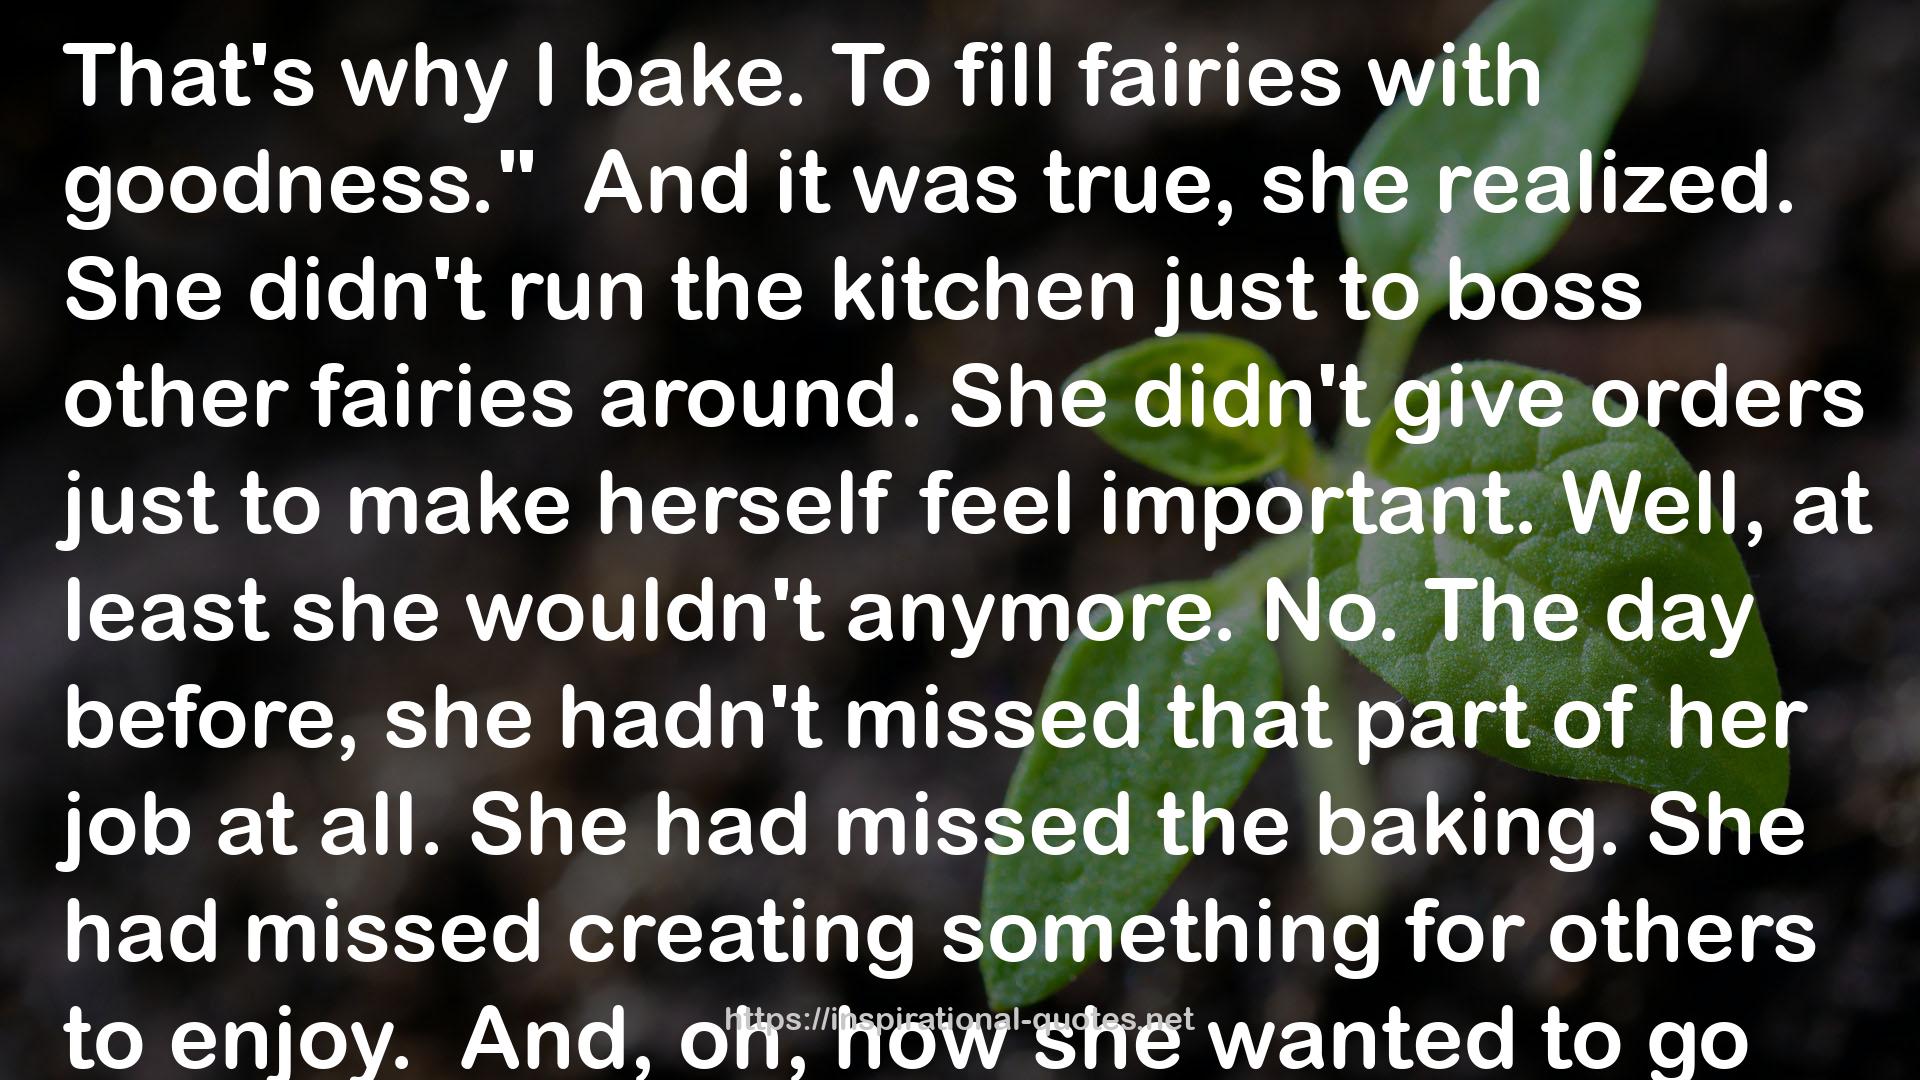 Dulcie's Taste of Magic (Tales of Pixie Hollow, #11) QUOTES